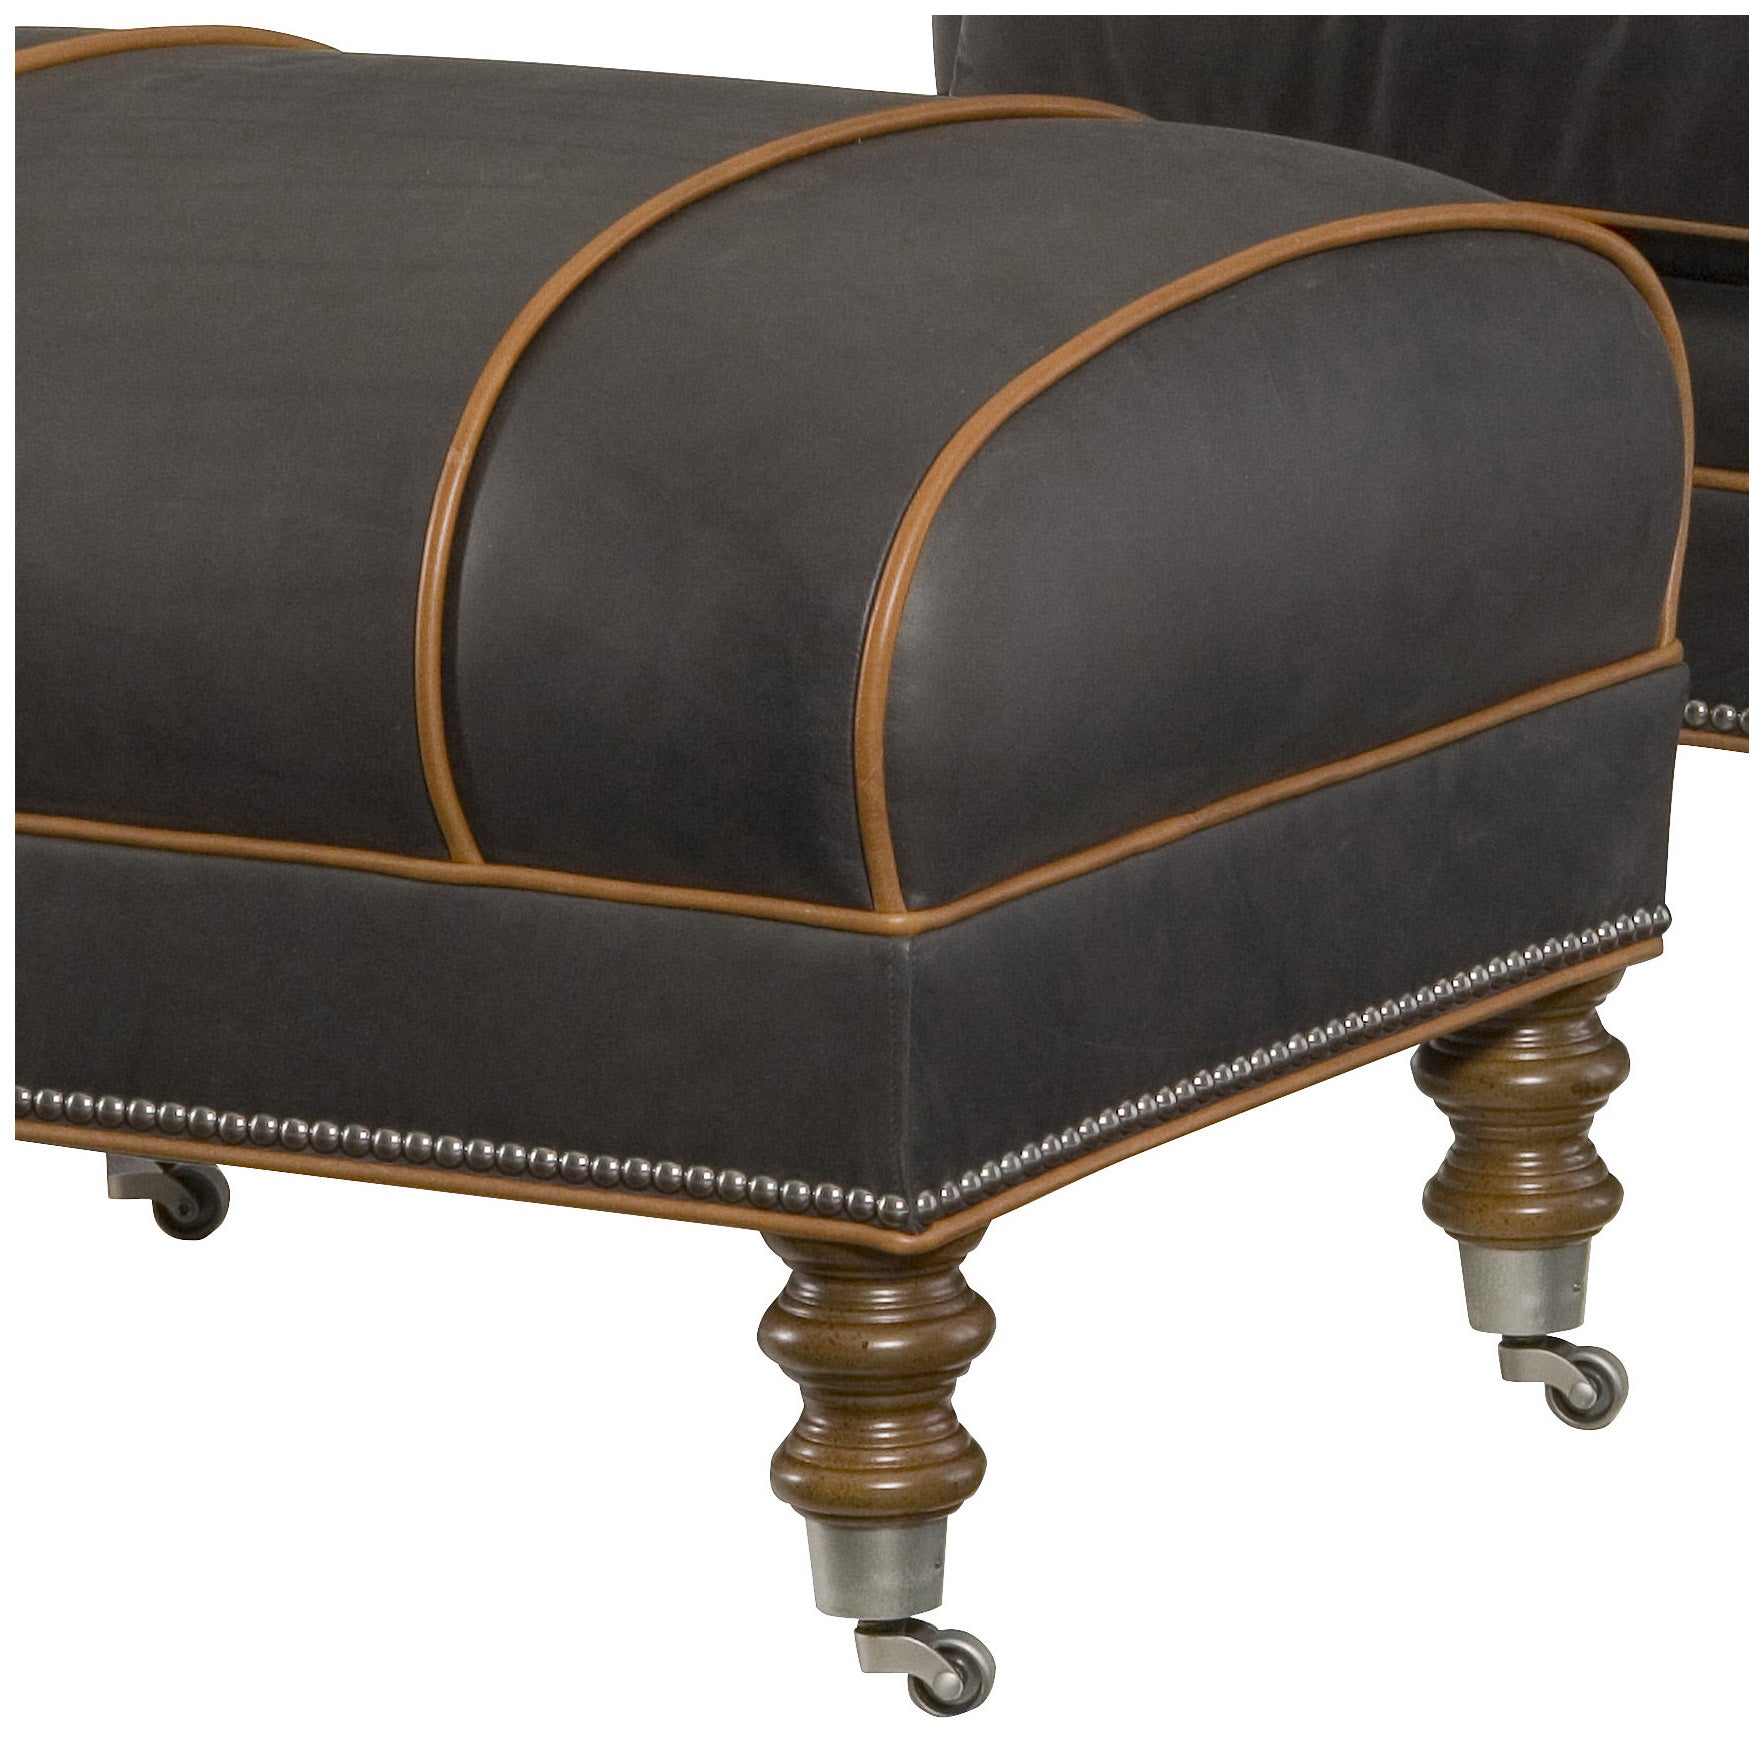 Hartwell Leather Ottoman by Wesley Hall, shown in Crockett Chimney leather - close up